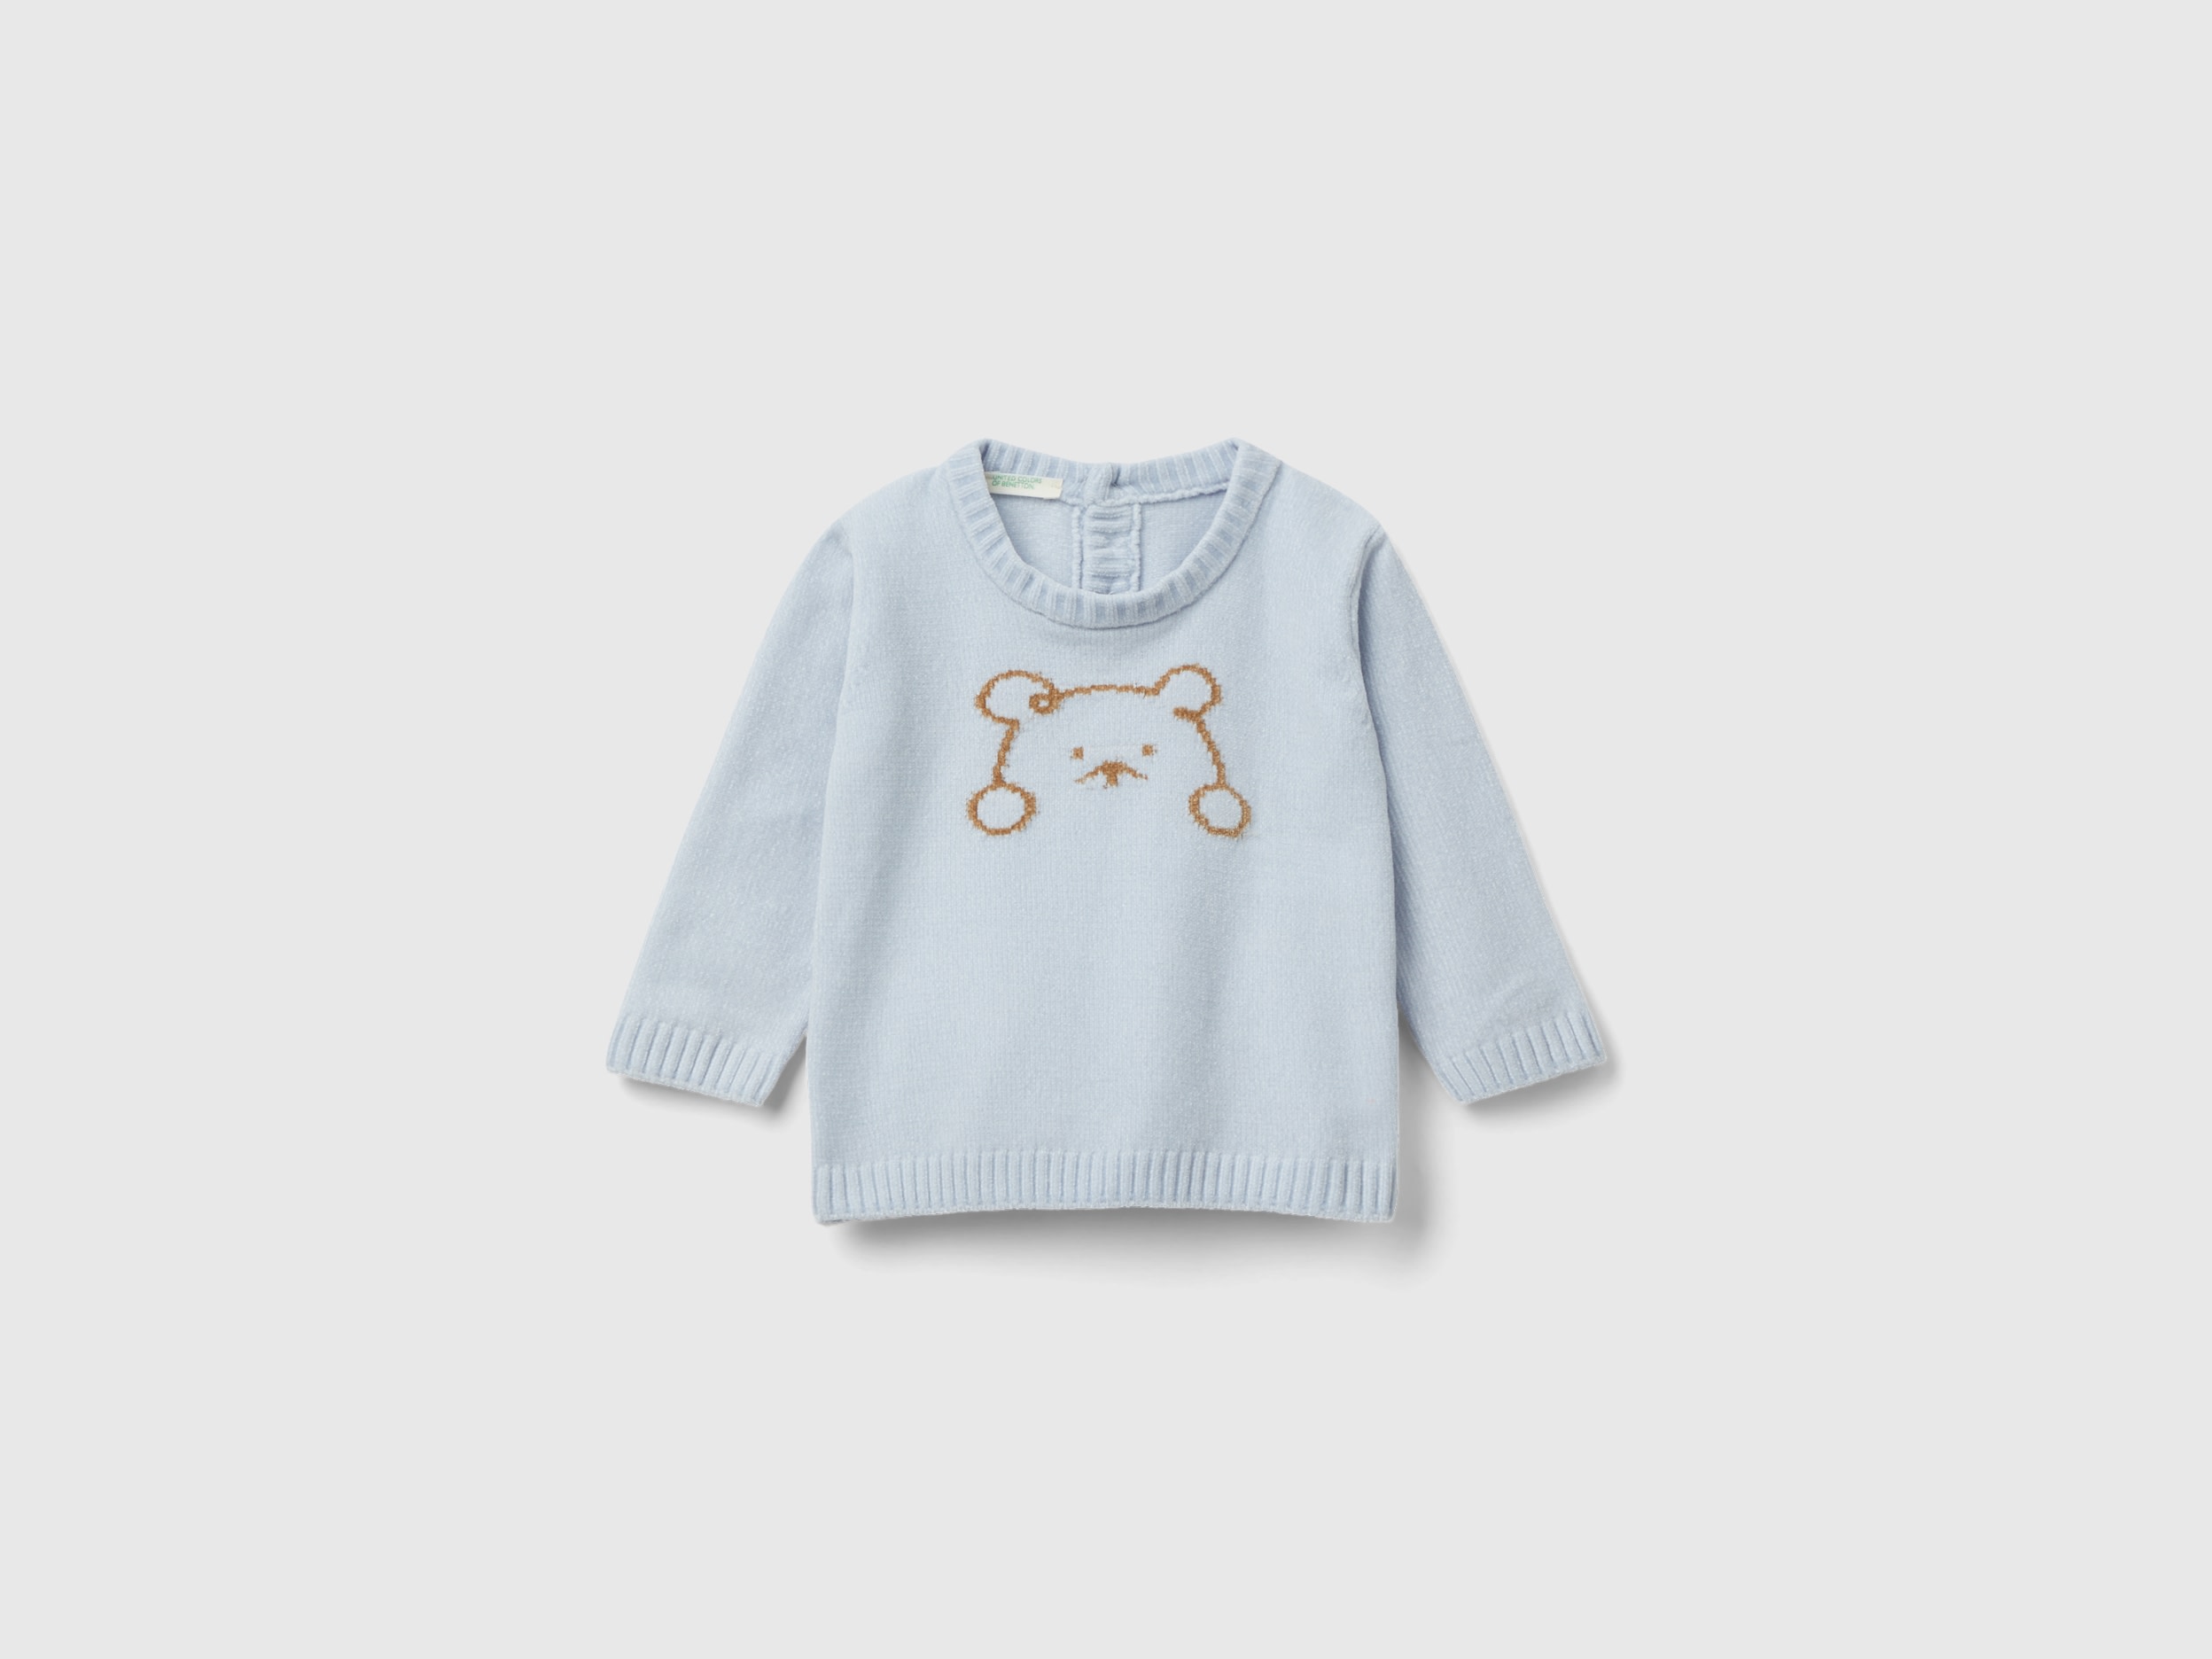 Benetton, Chenille Sweater With Inlay, size 9-12, Sky Blue, Kids